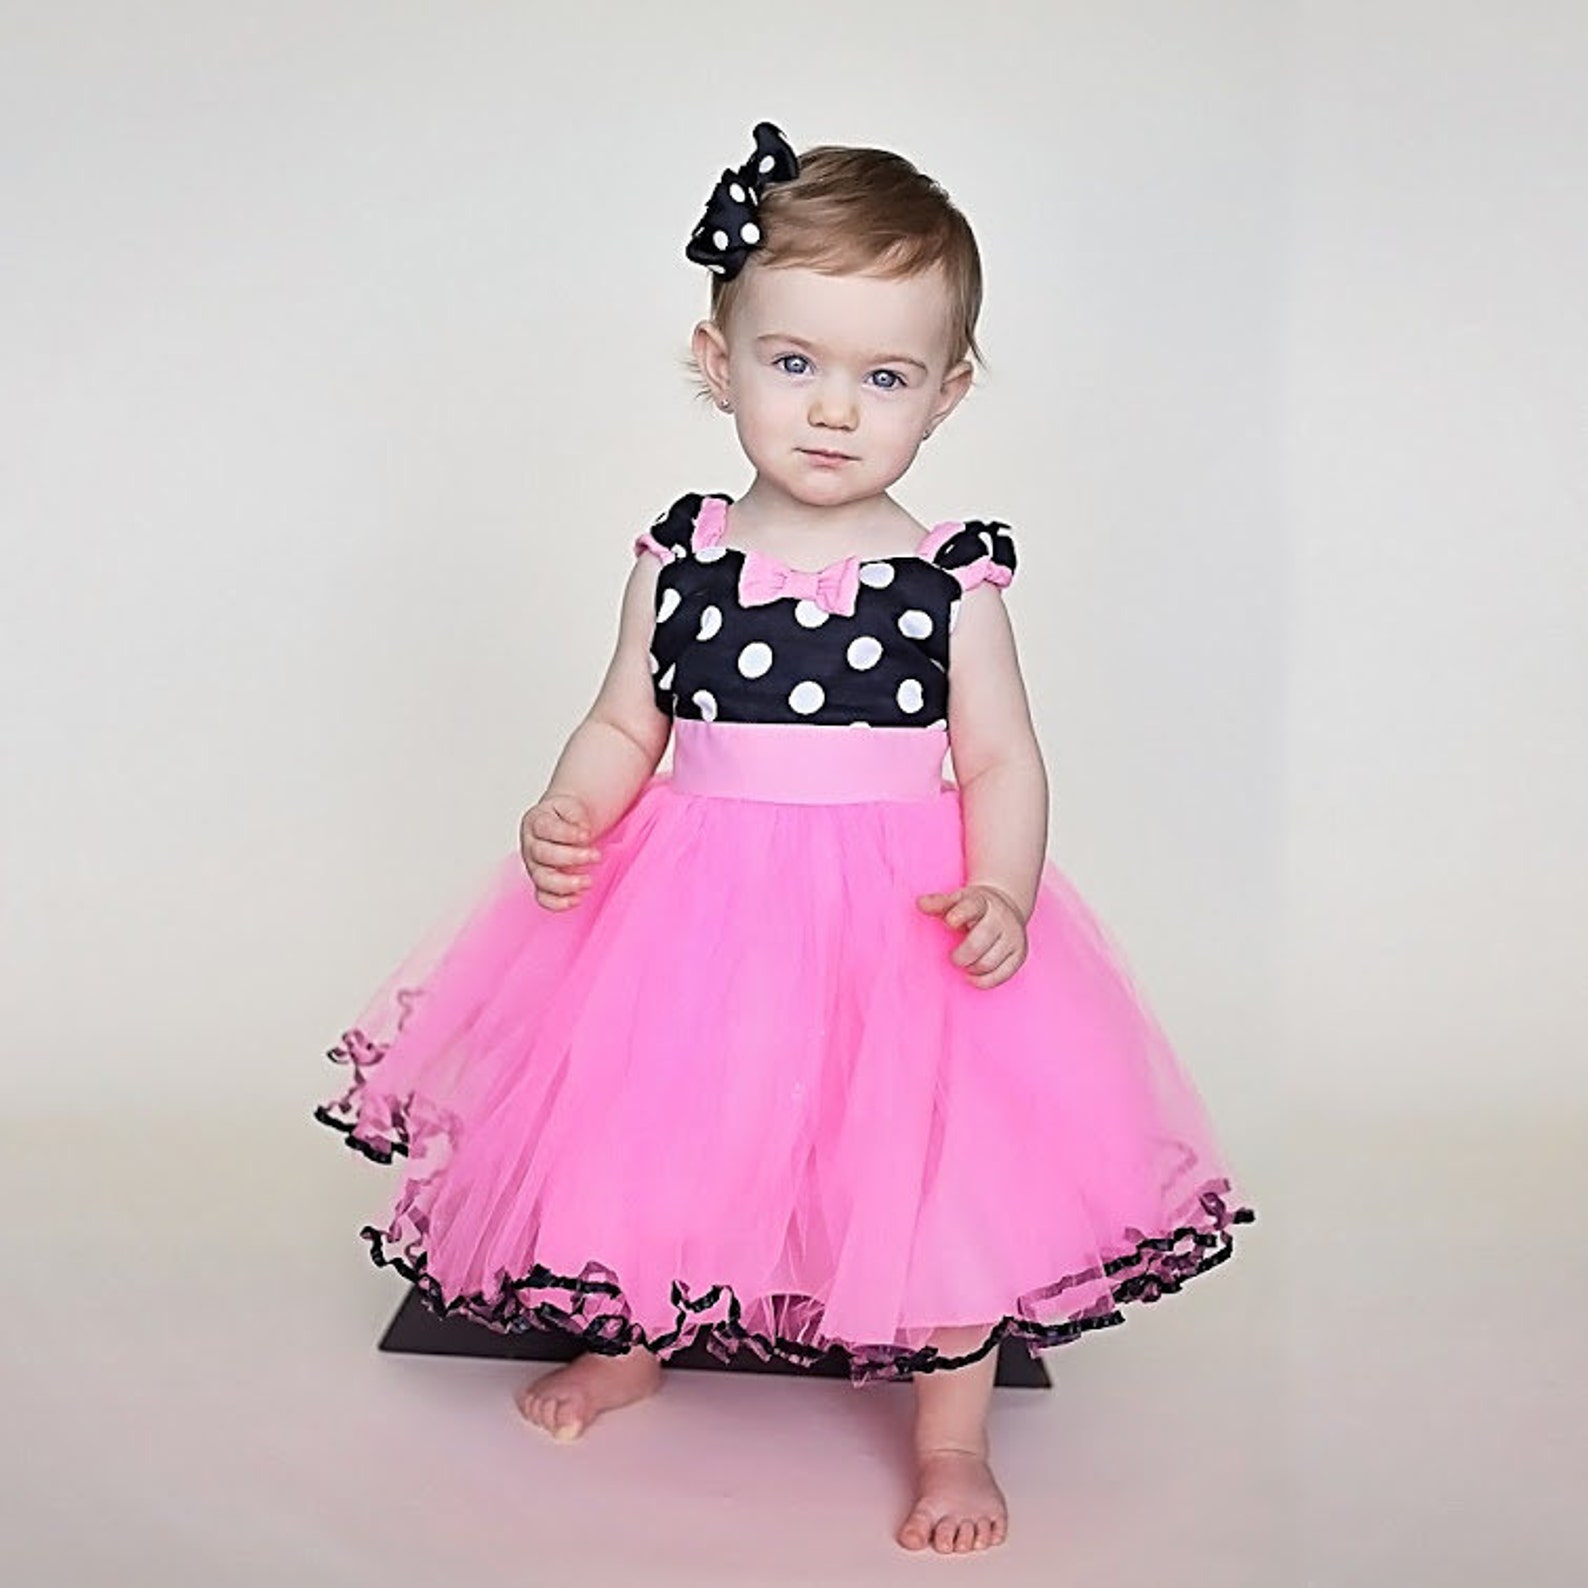 MINNIE MOUSE Dress TUTU Minnie Mouse Party Dress in Hot Pink - Etsy